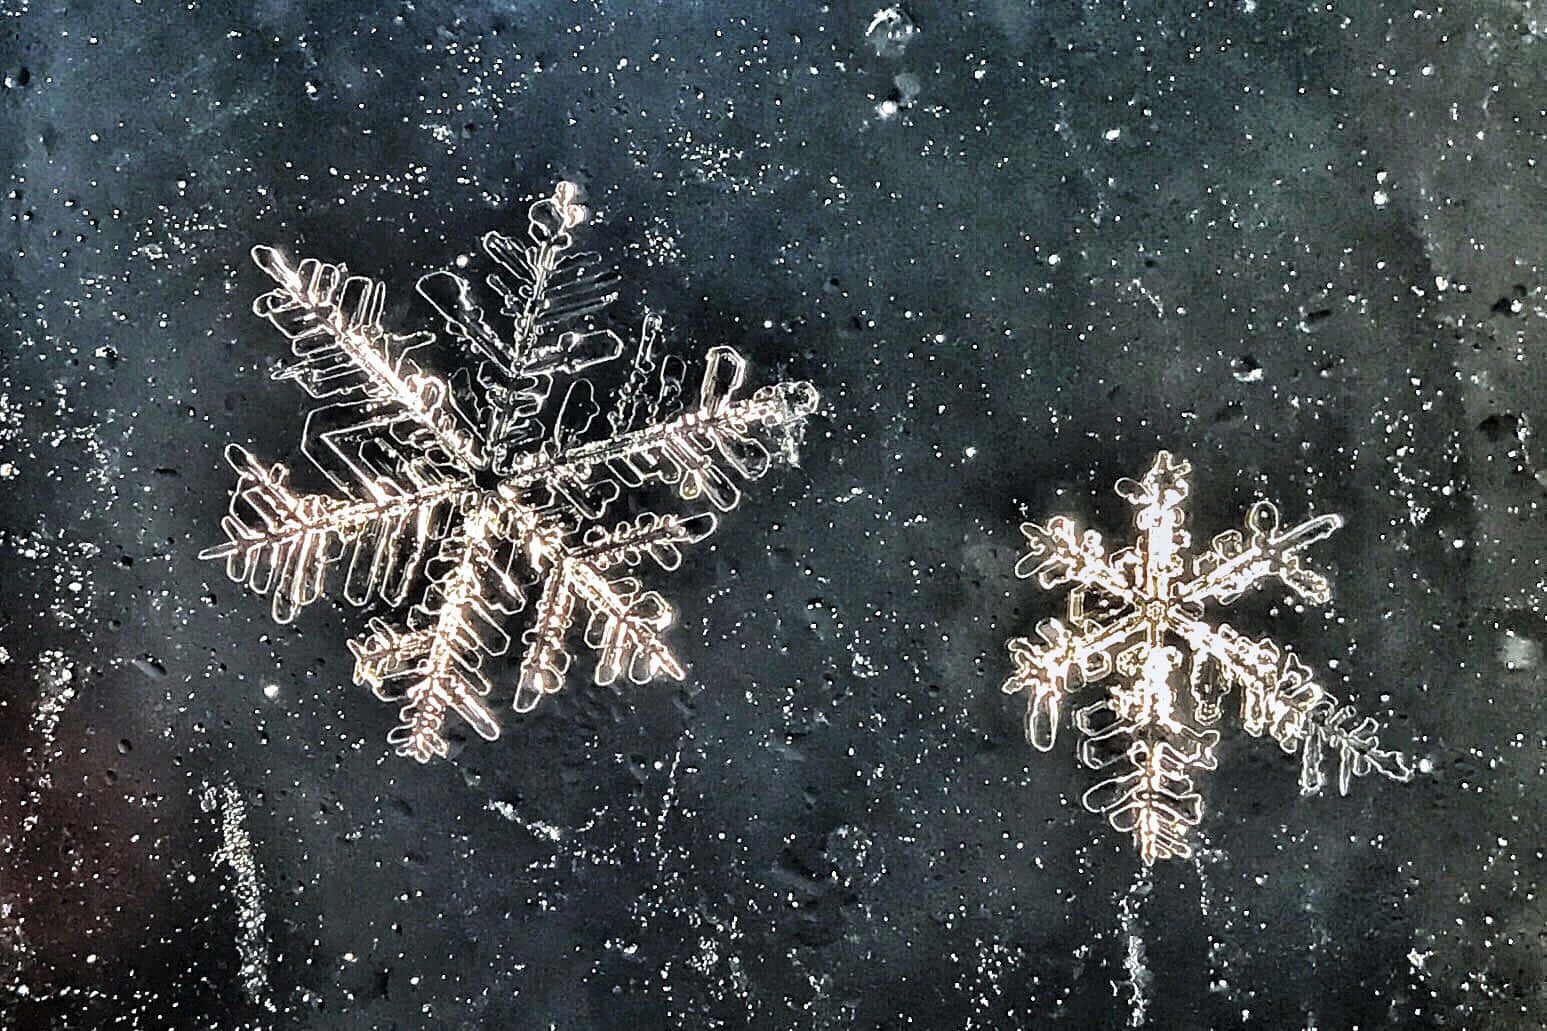 A stunning snowflake frozen in time